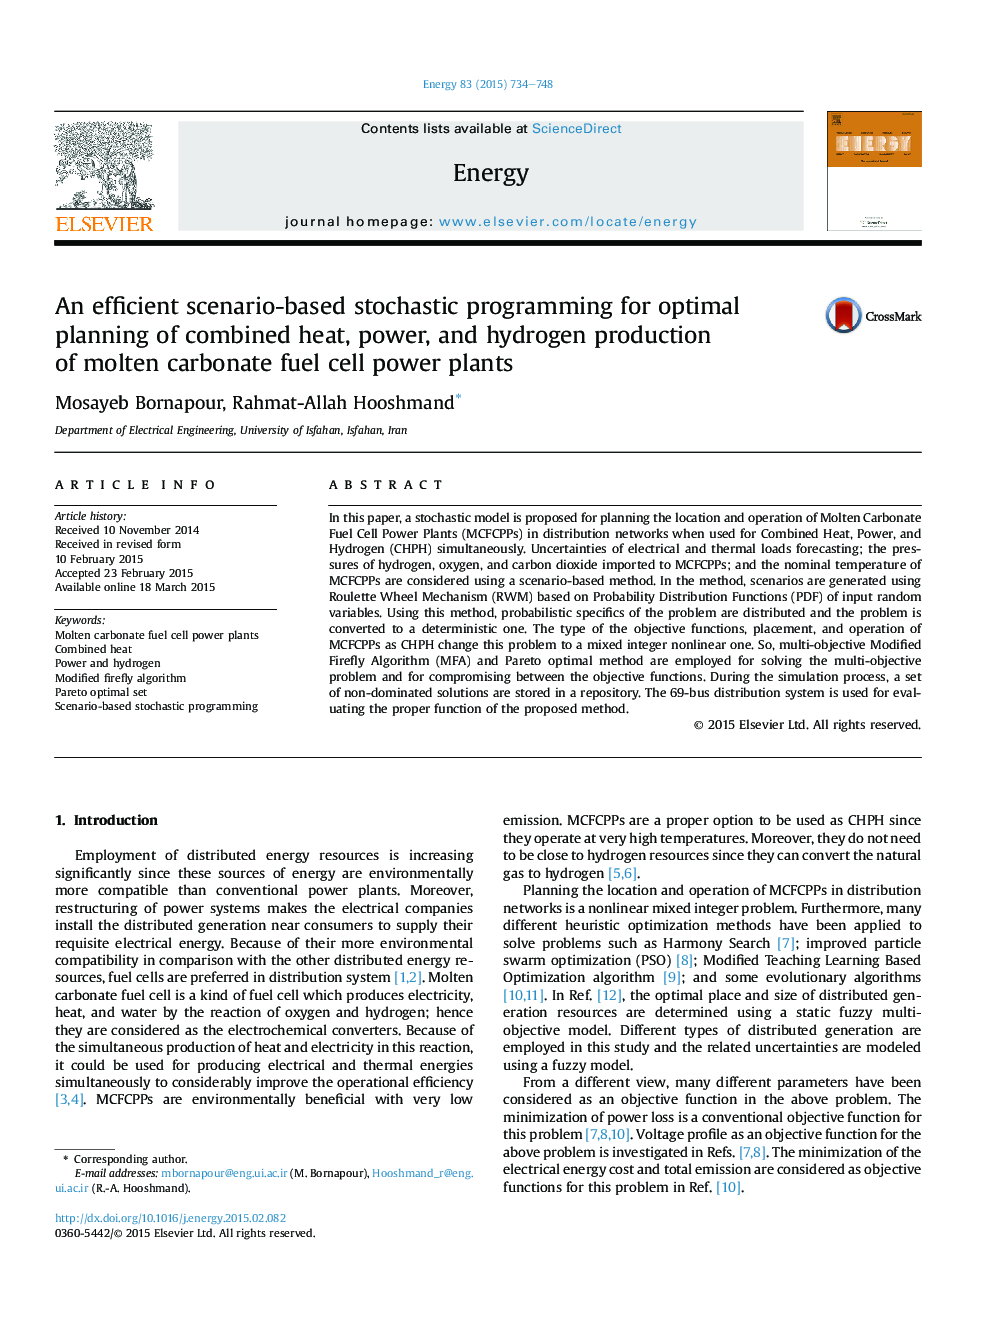 An efficient scenario-based stochastic programming for optimal planning of combined heat, power, and hydrogen production ofÂ molten carbonate fuel cell power plants